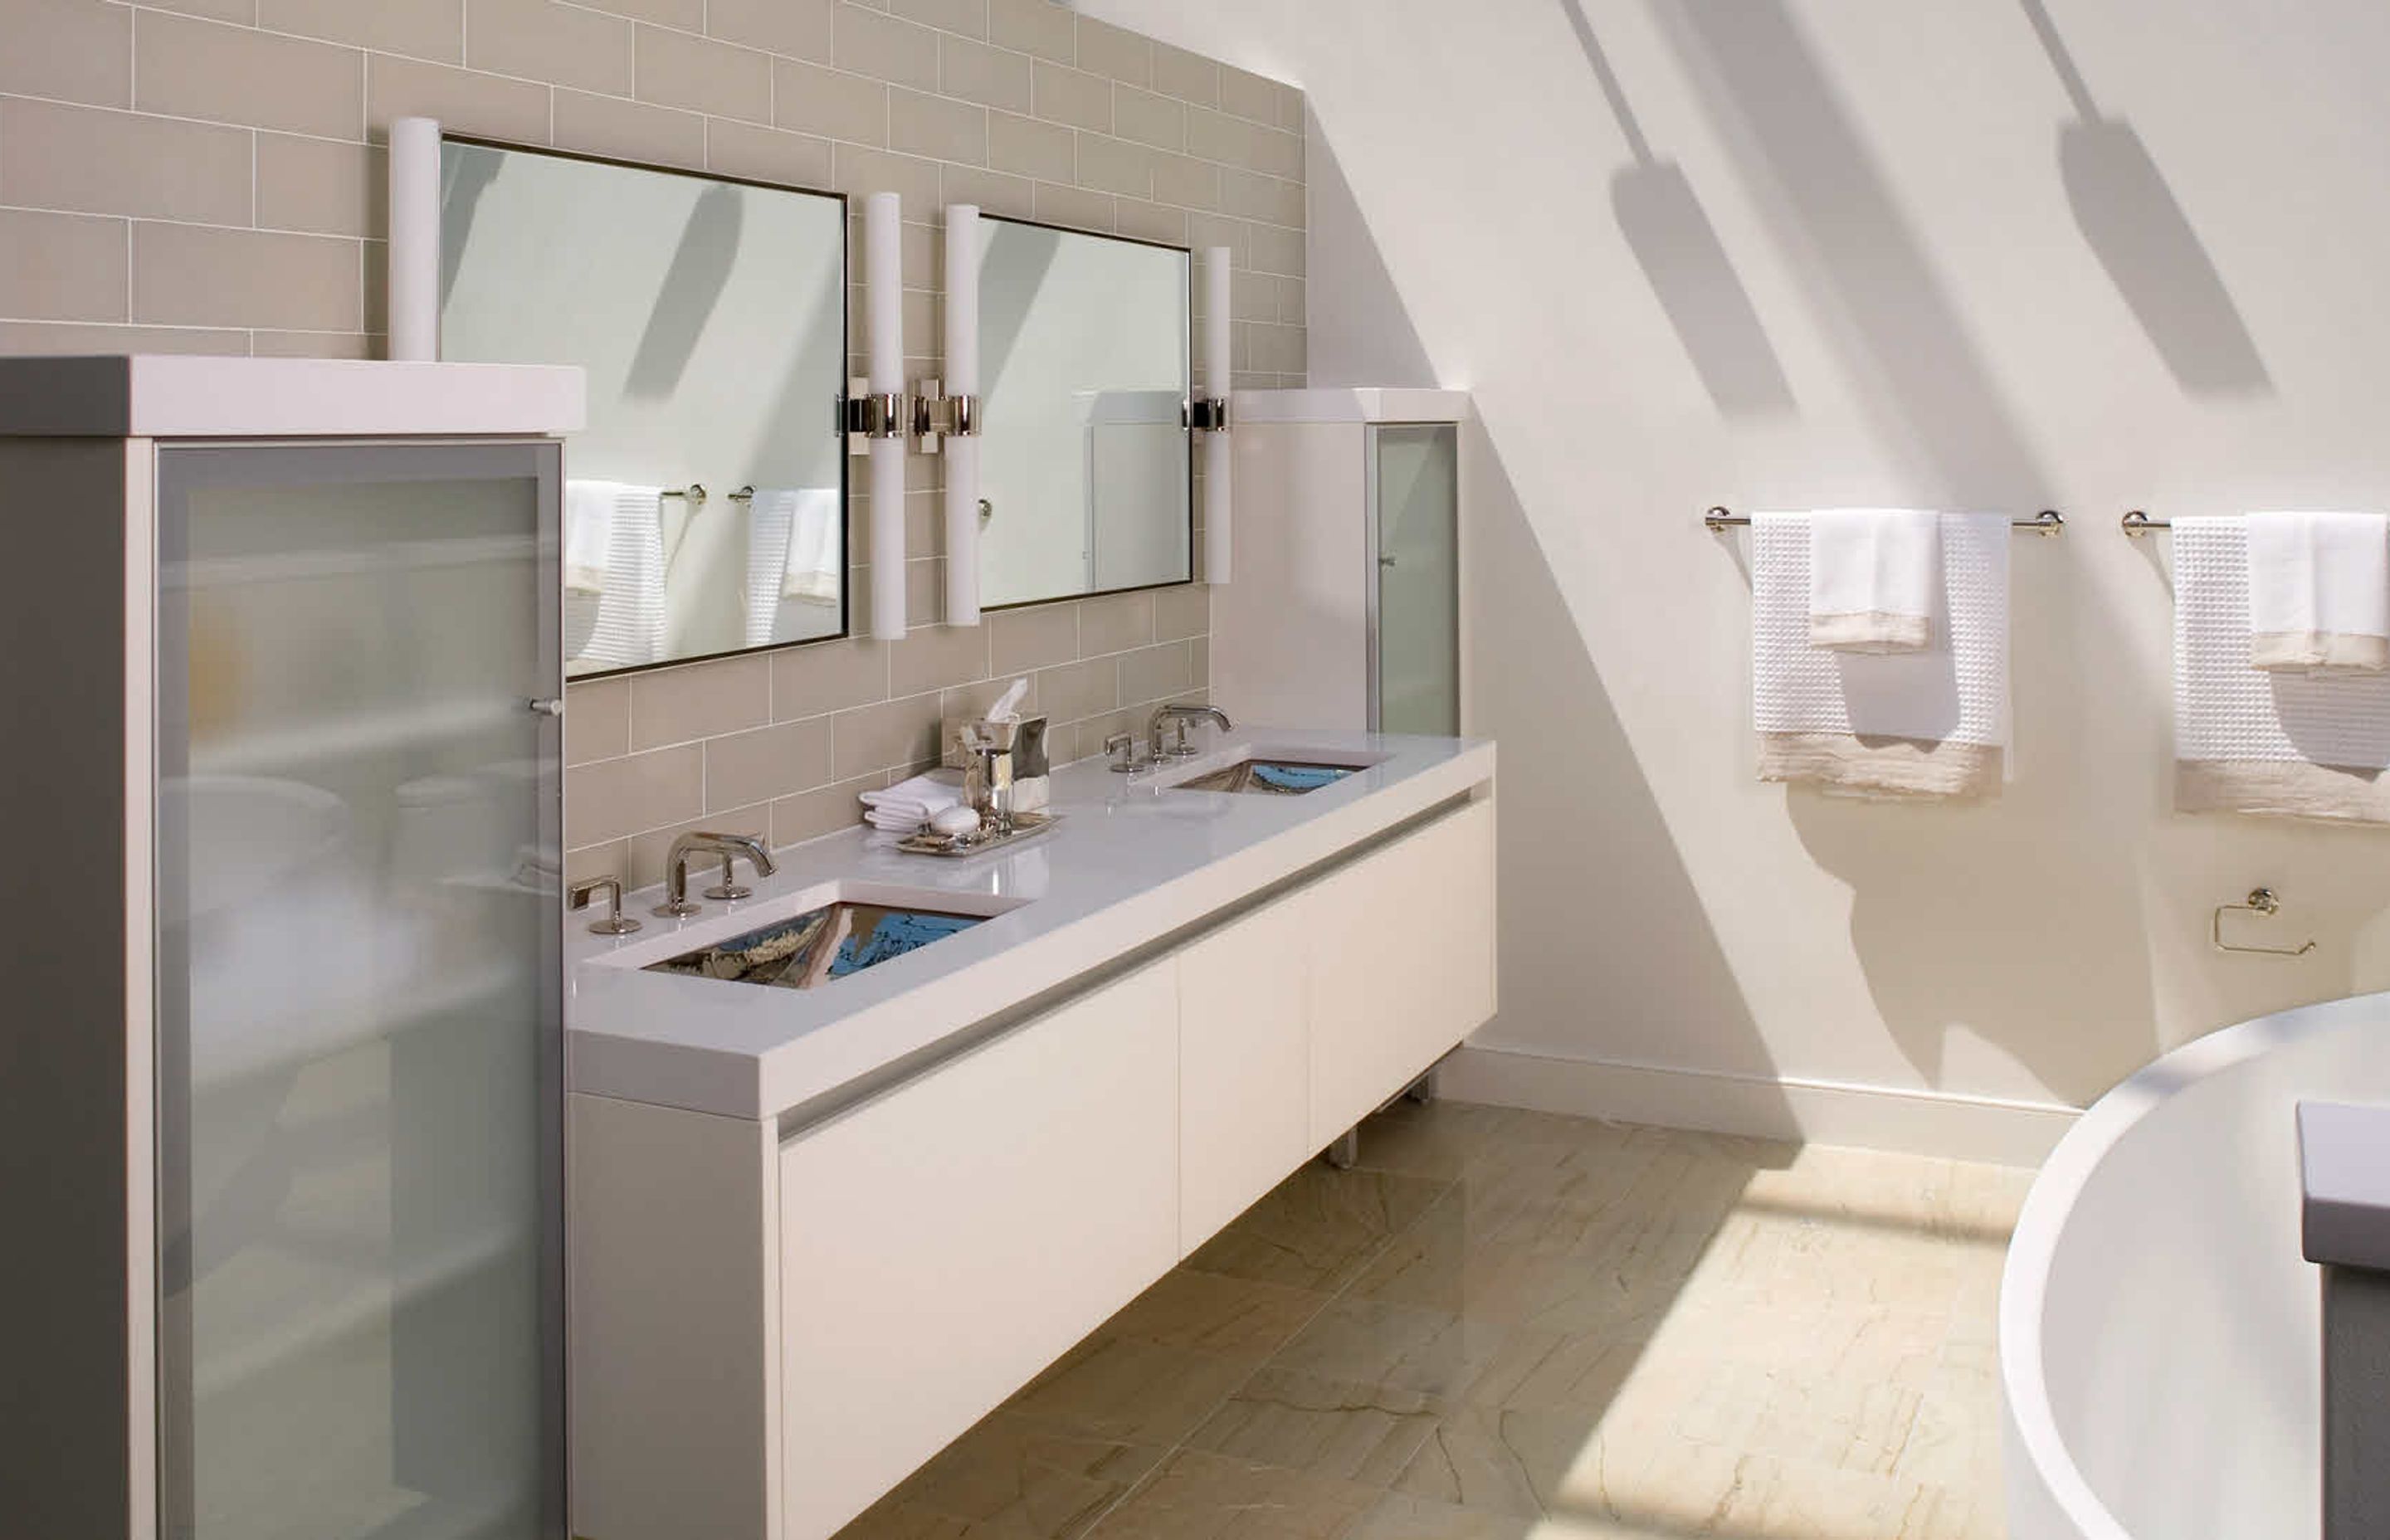 Bathroom Solutions from Poggenpohl